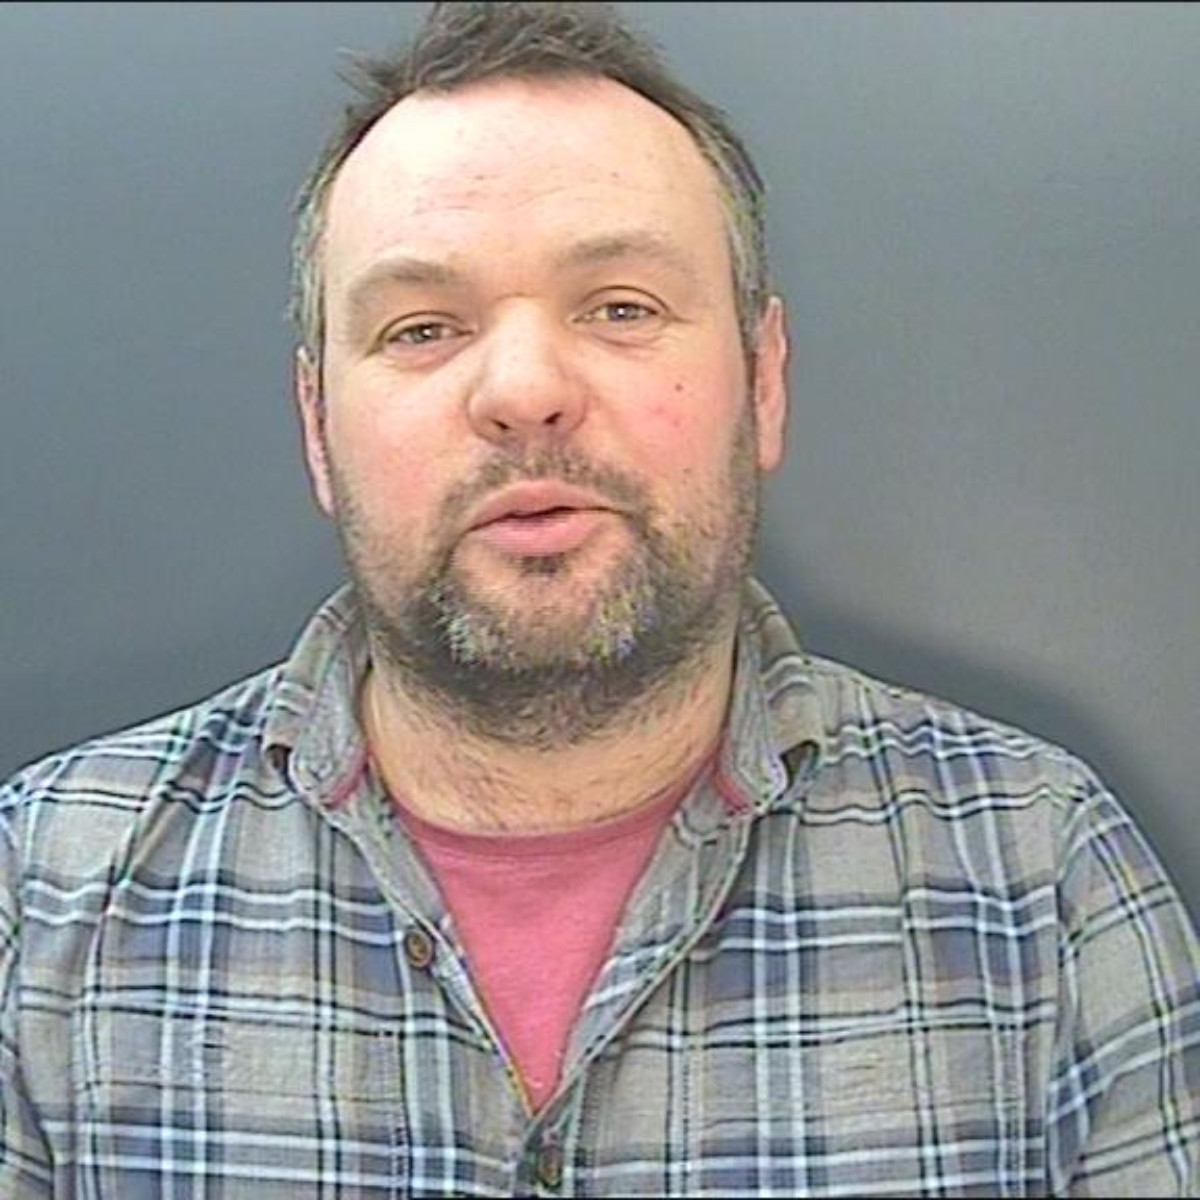 Nicholas Dalby, 50, formerly of Thirsk, was sentenced at York Crown Court